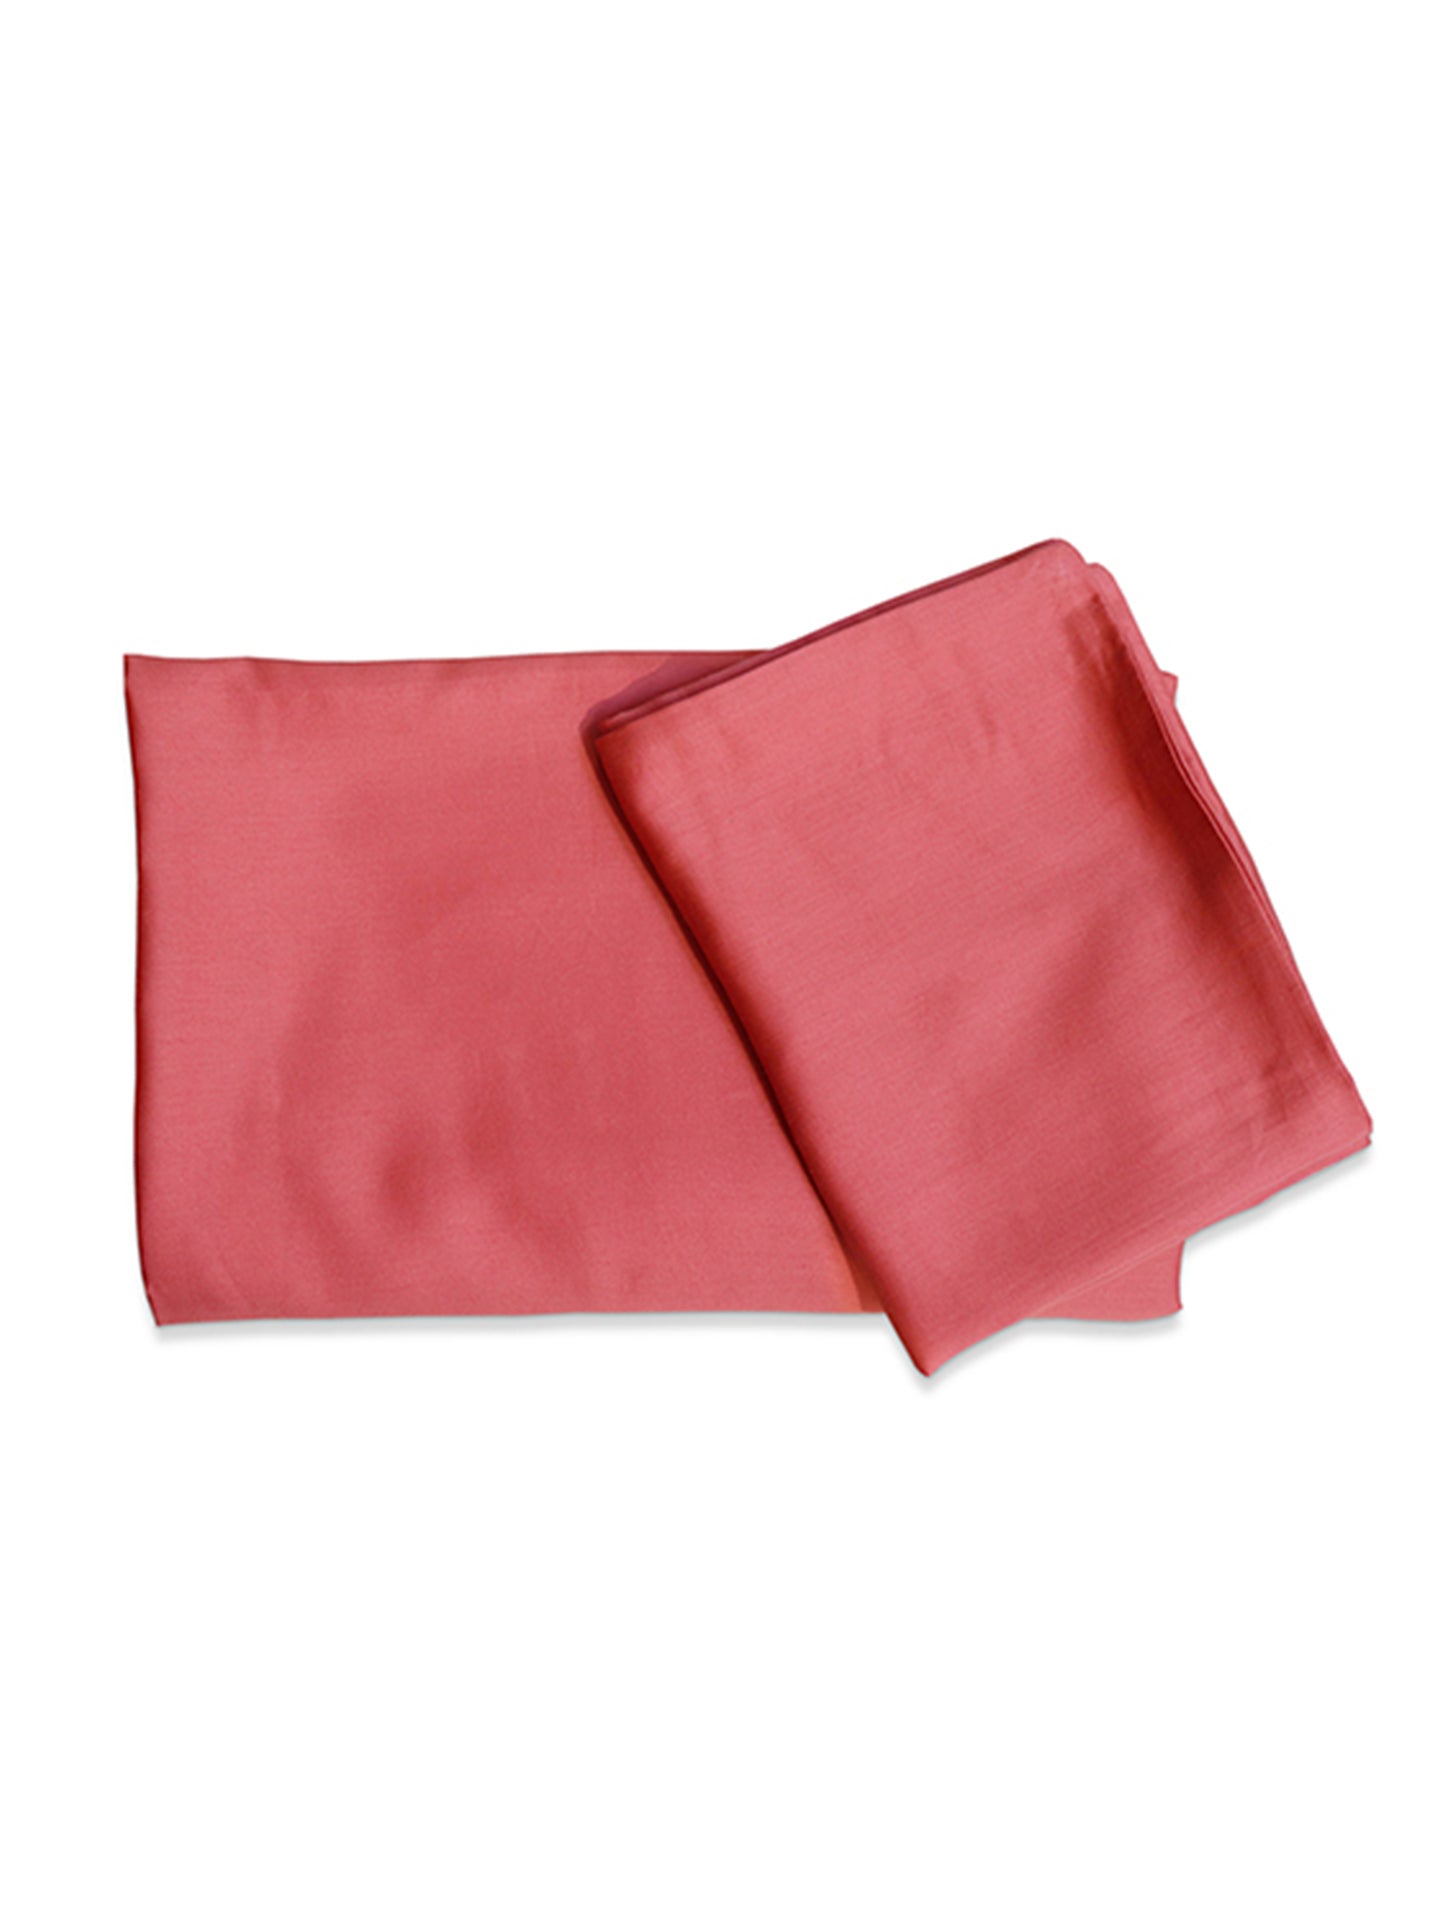 coral pink colored plain soft bedsheet with 2 matching pillow covers made from 100% pure cotton for king size double bed in 108x108inches